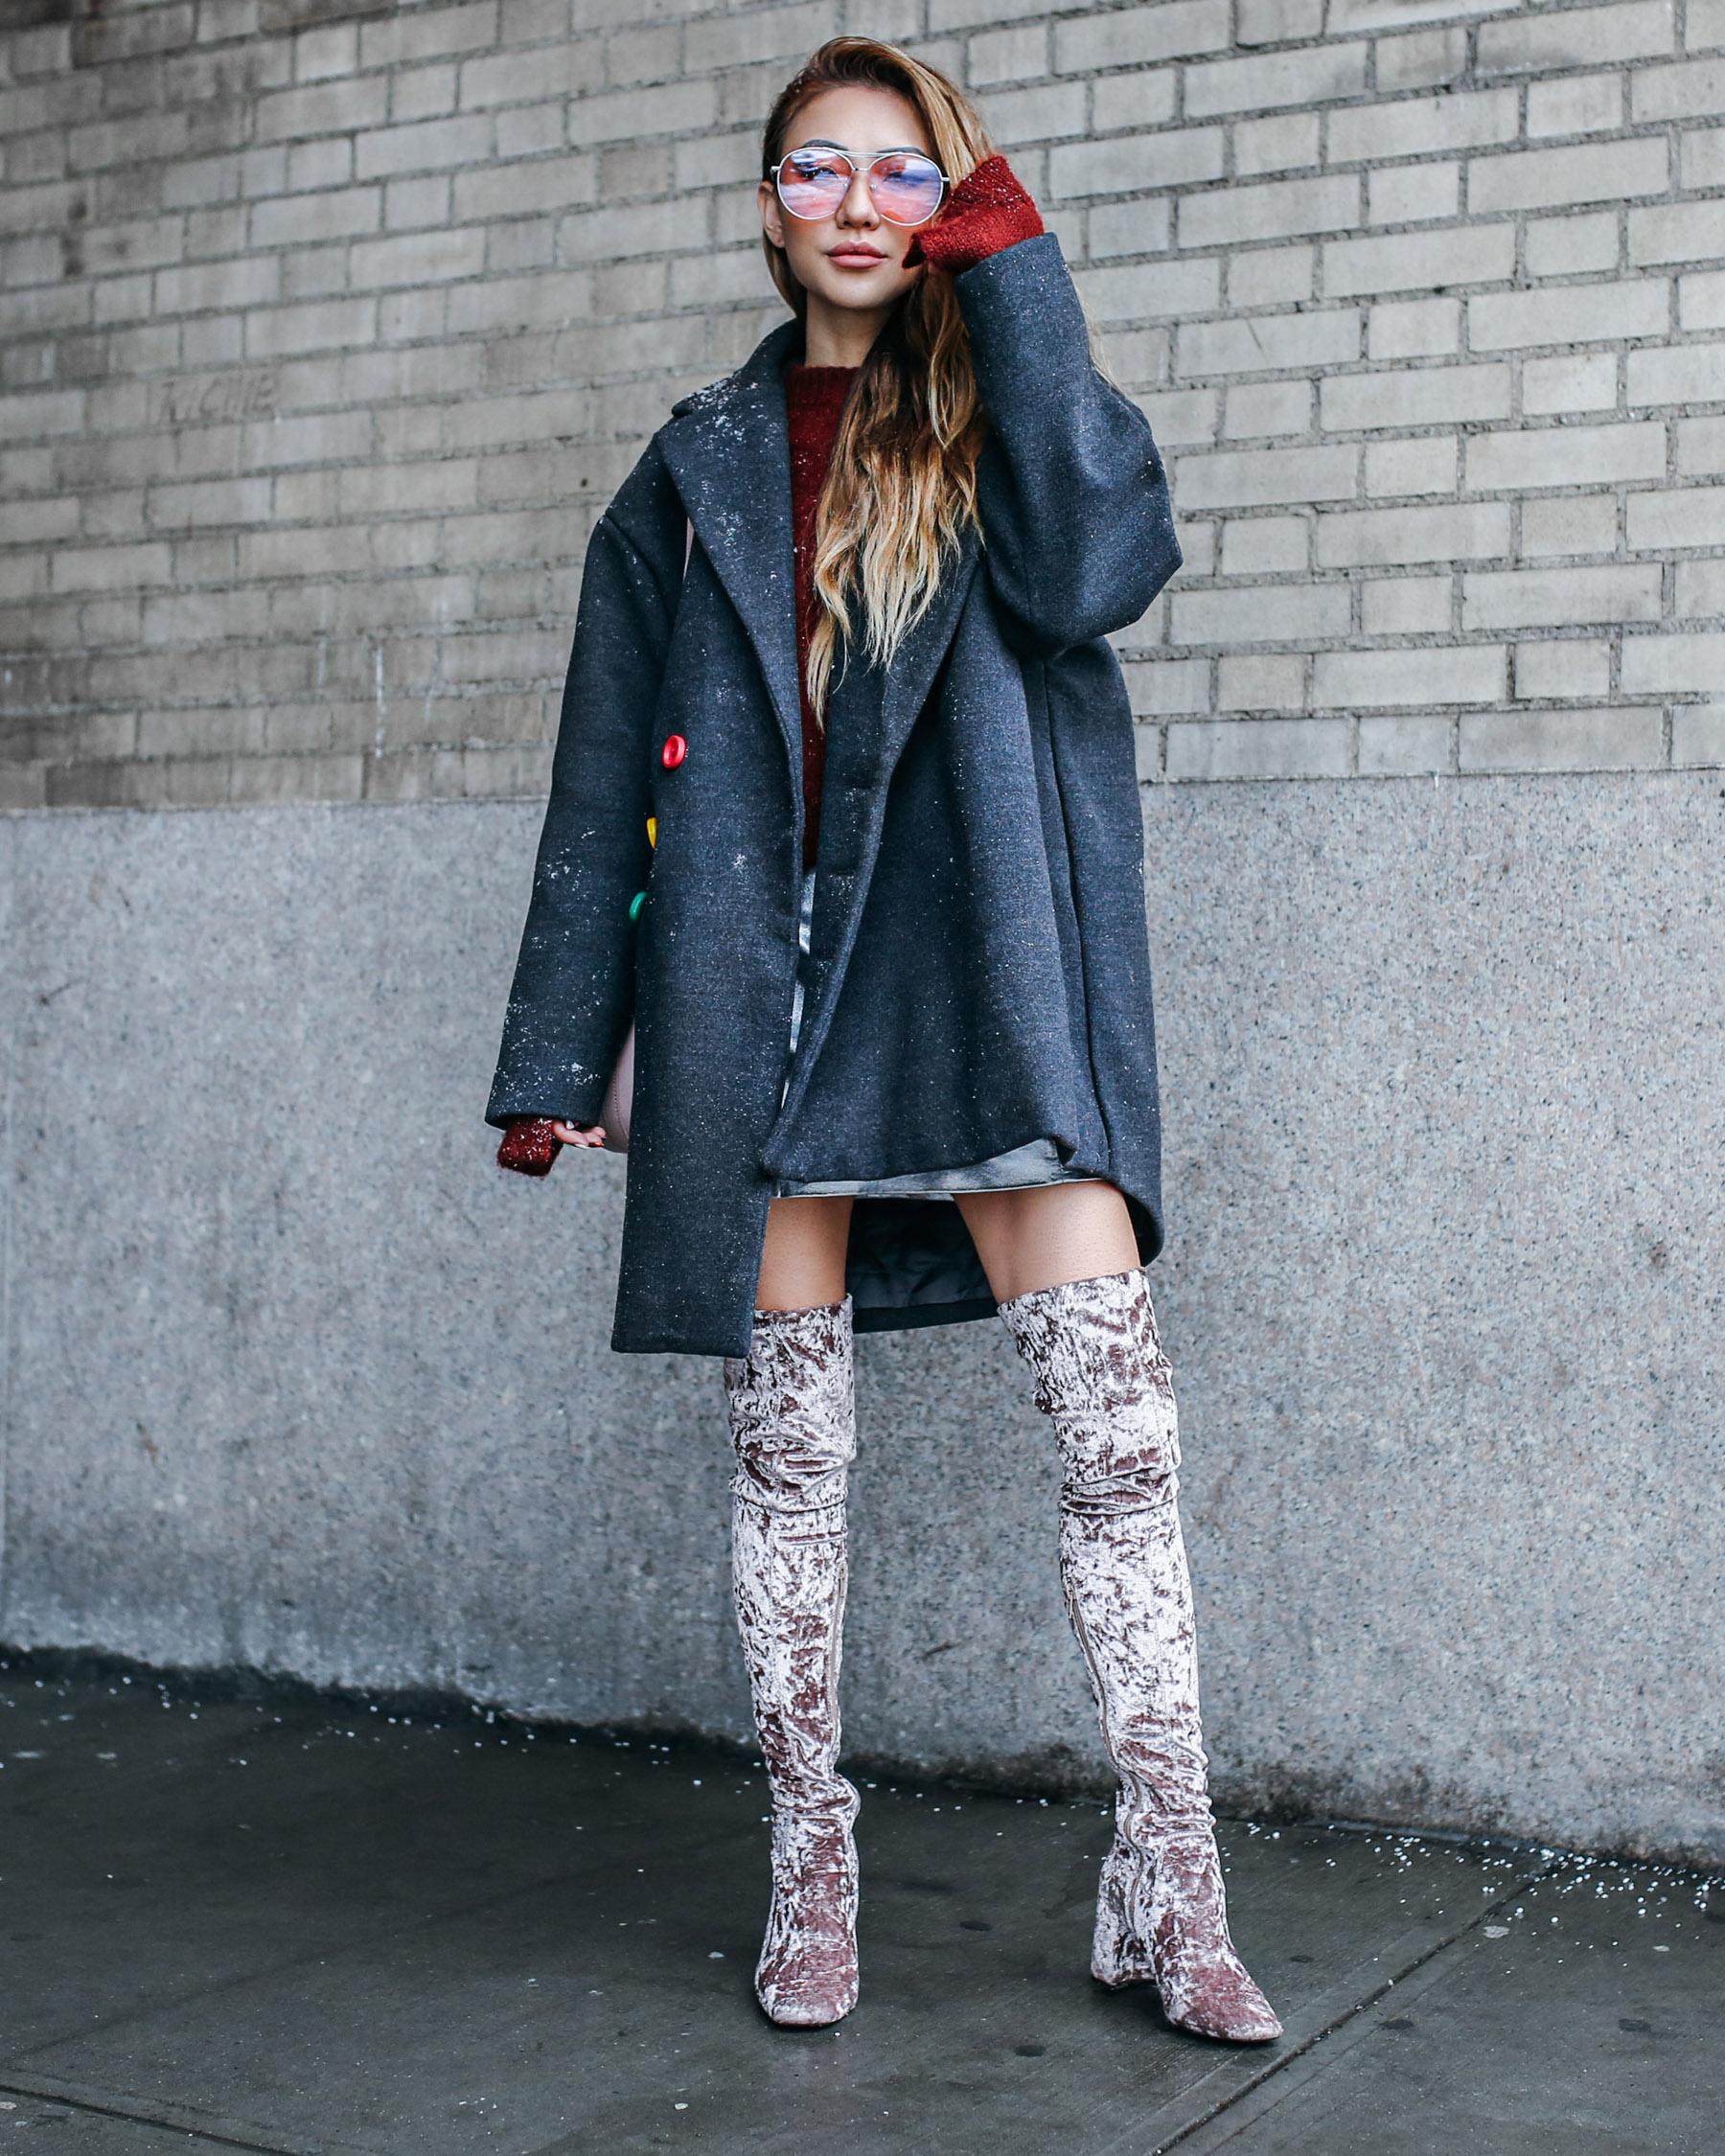 Must-Have Boot Styles You Need Now // NotJessFashion.com